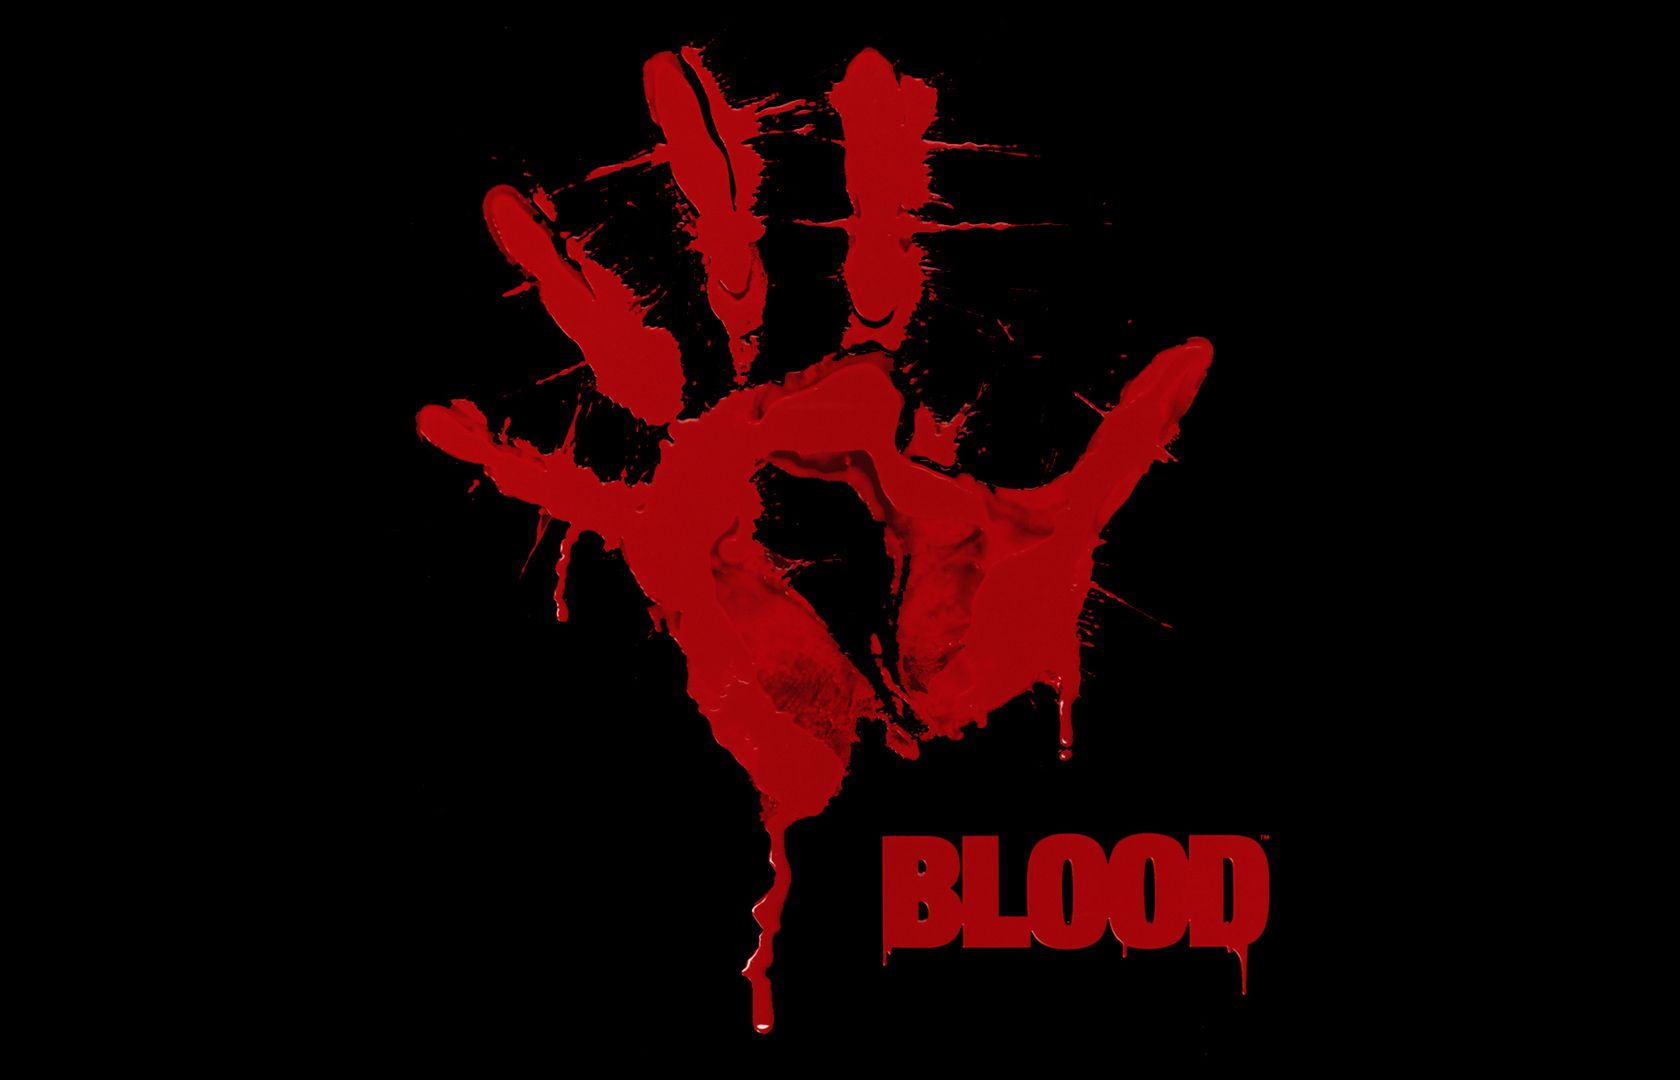 is back 4 blood on game pass pc